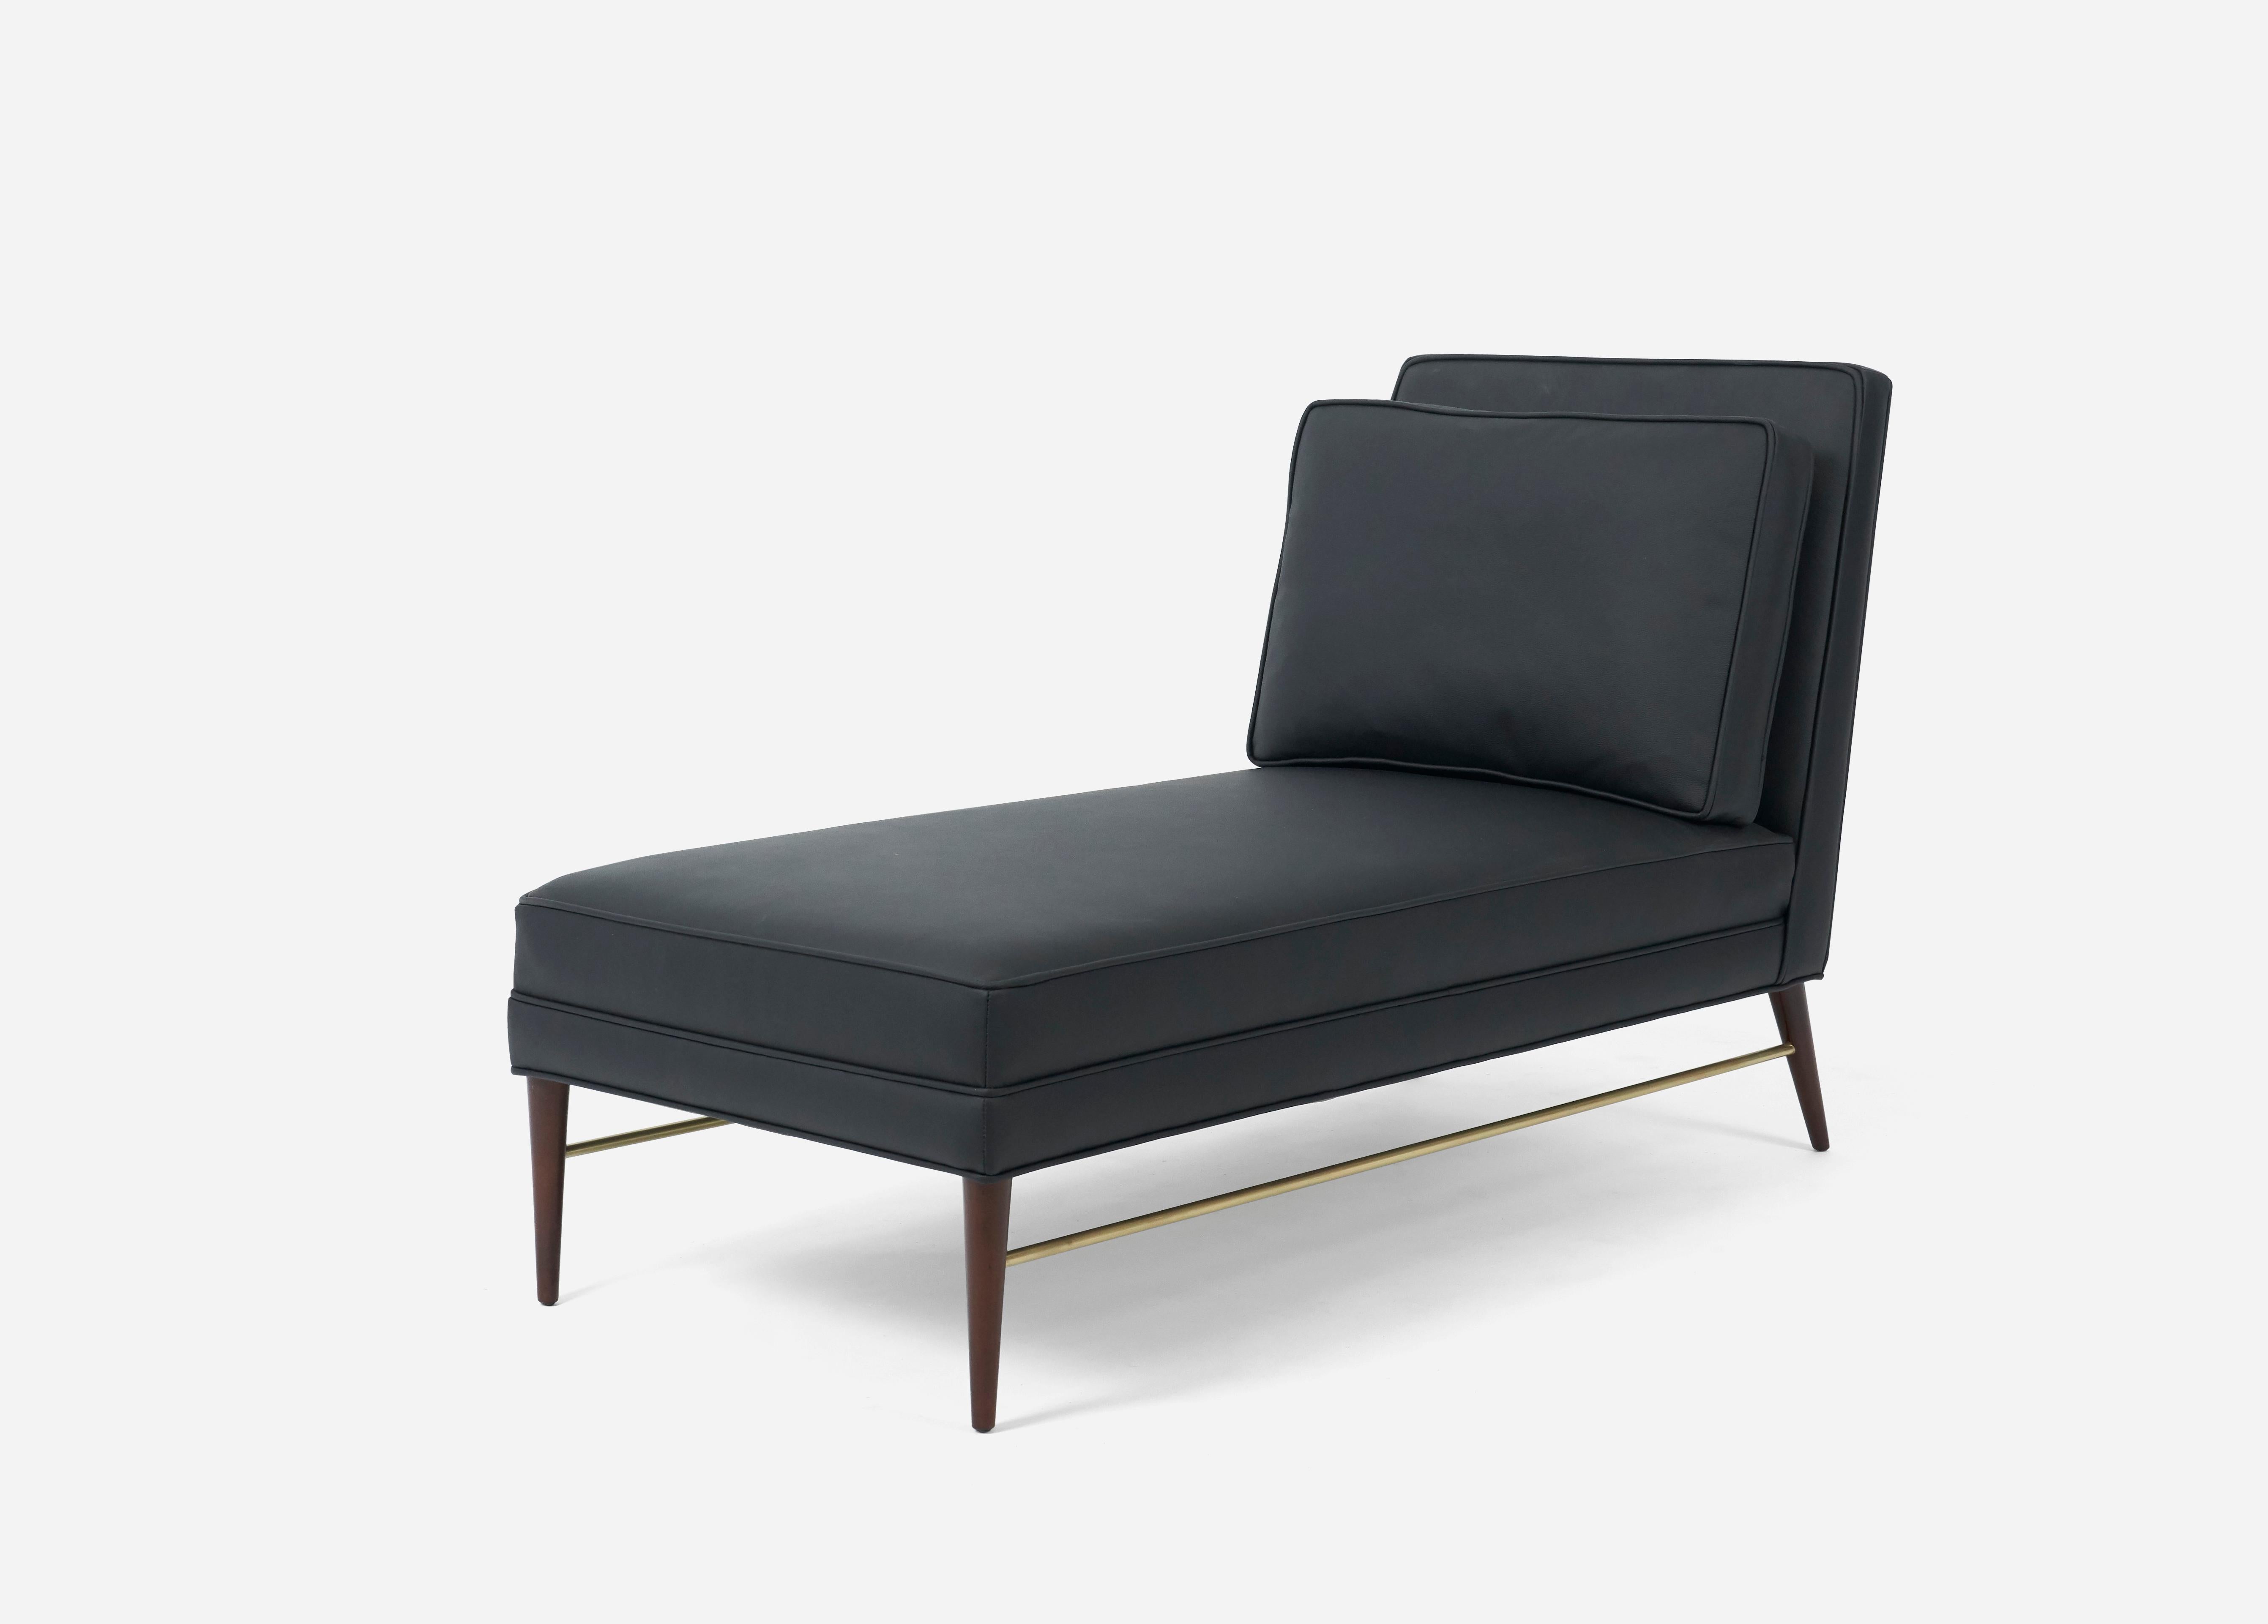 Chaise lounges by Paul McCobb for Calvin Furniture. Fully restored. Reupholstered in black leather. Polished brass stretchers.